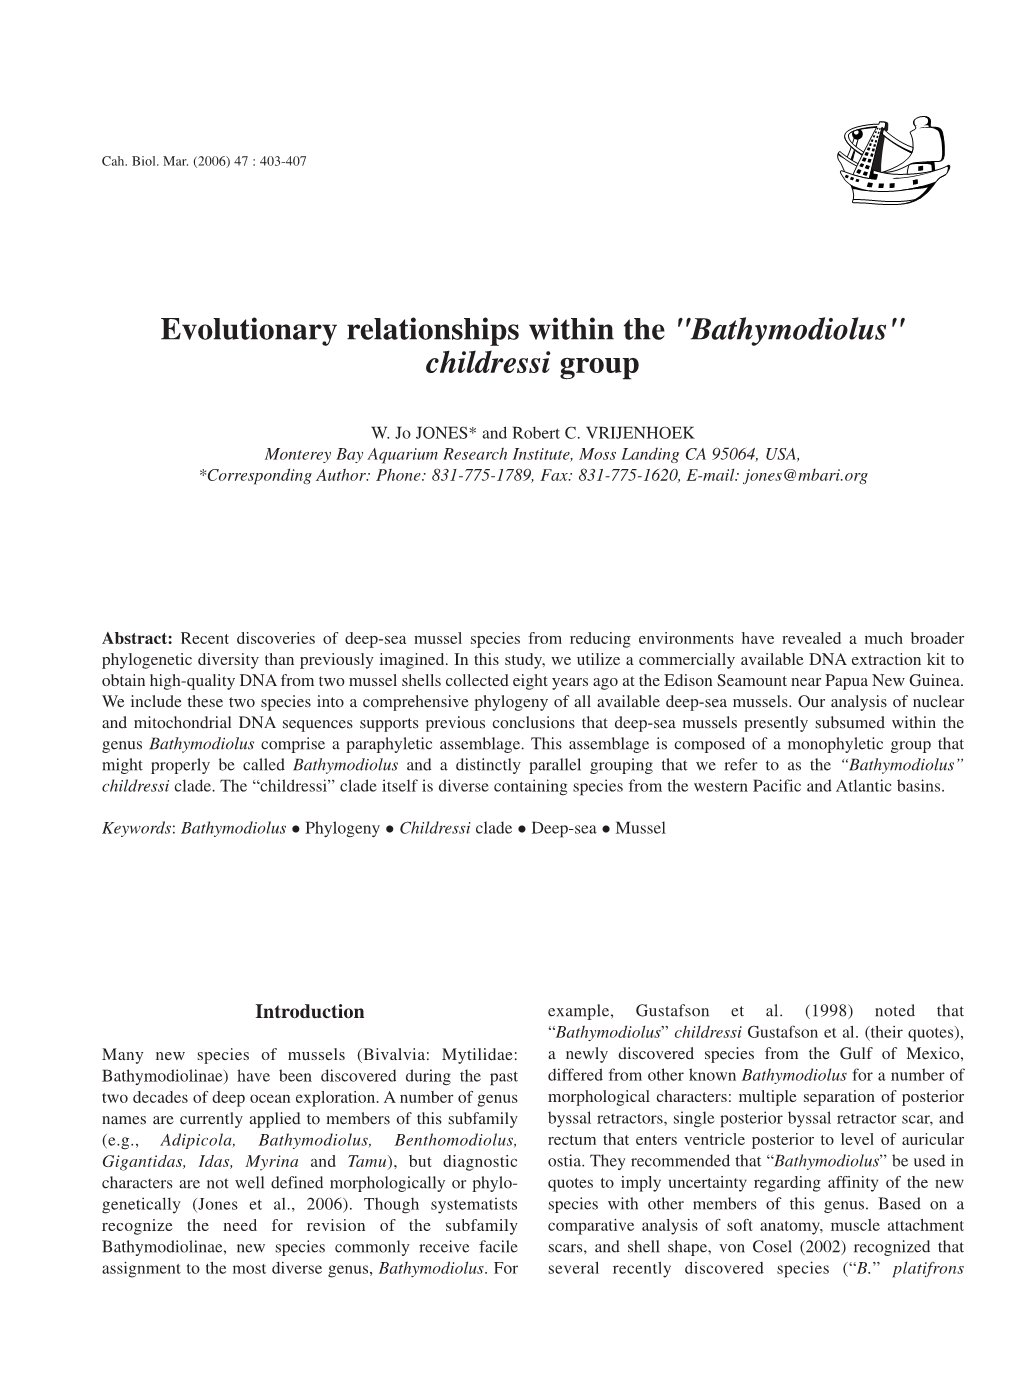 Evolutionary Relationships Within the "Bathymodiolus" Childressi Group